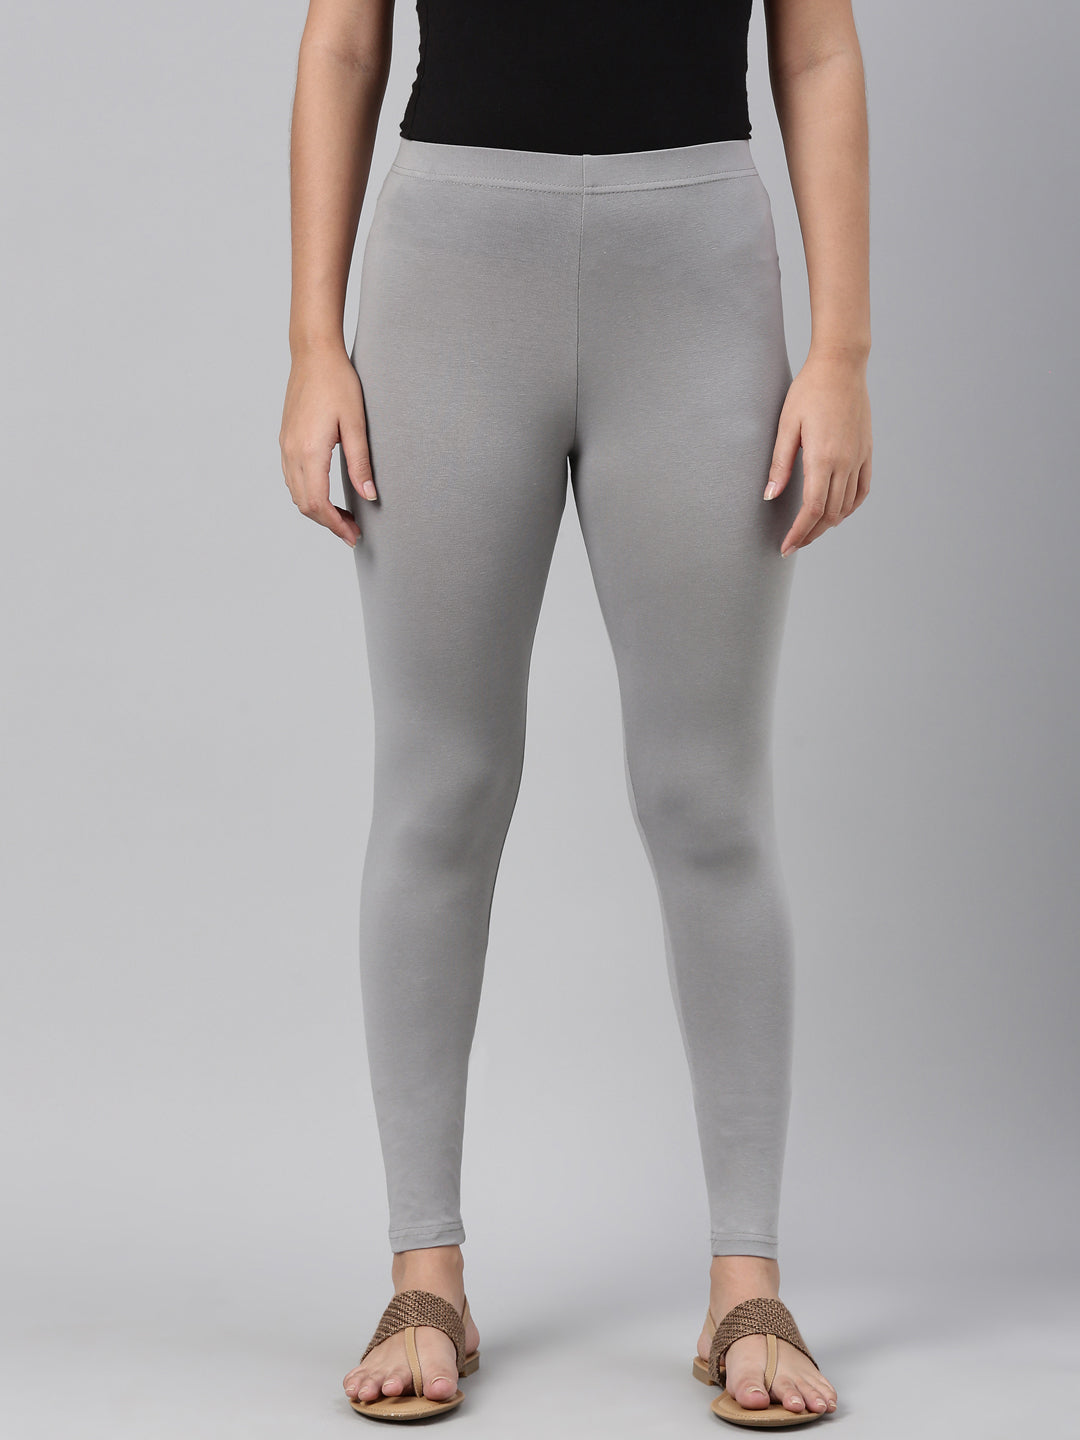 Grey Colour Ankle Length Cosy Leggings | 1 People